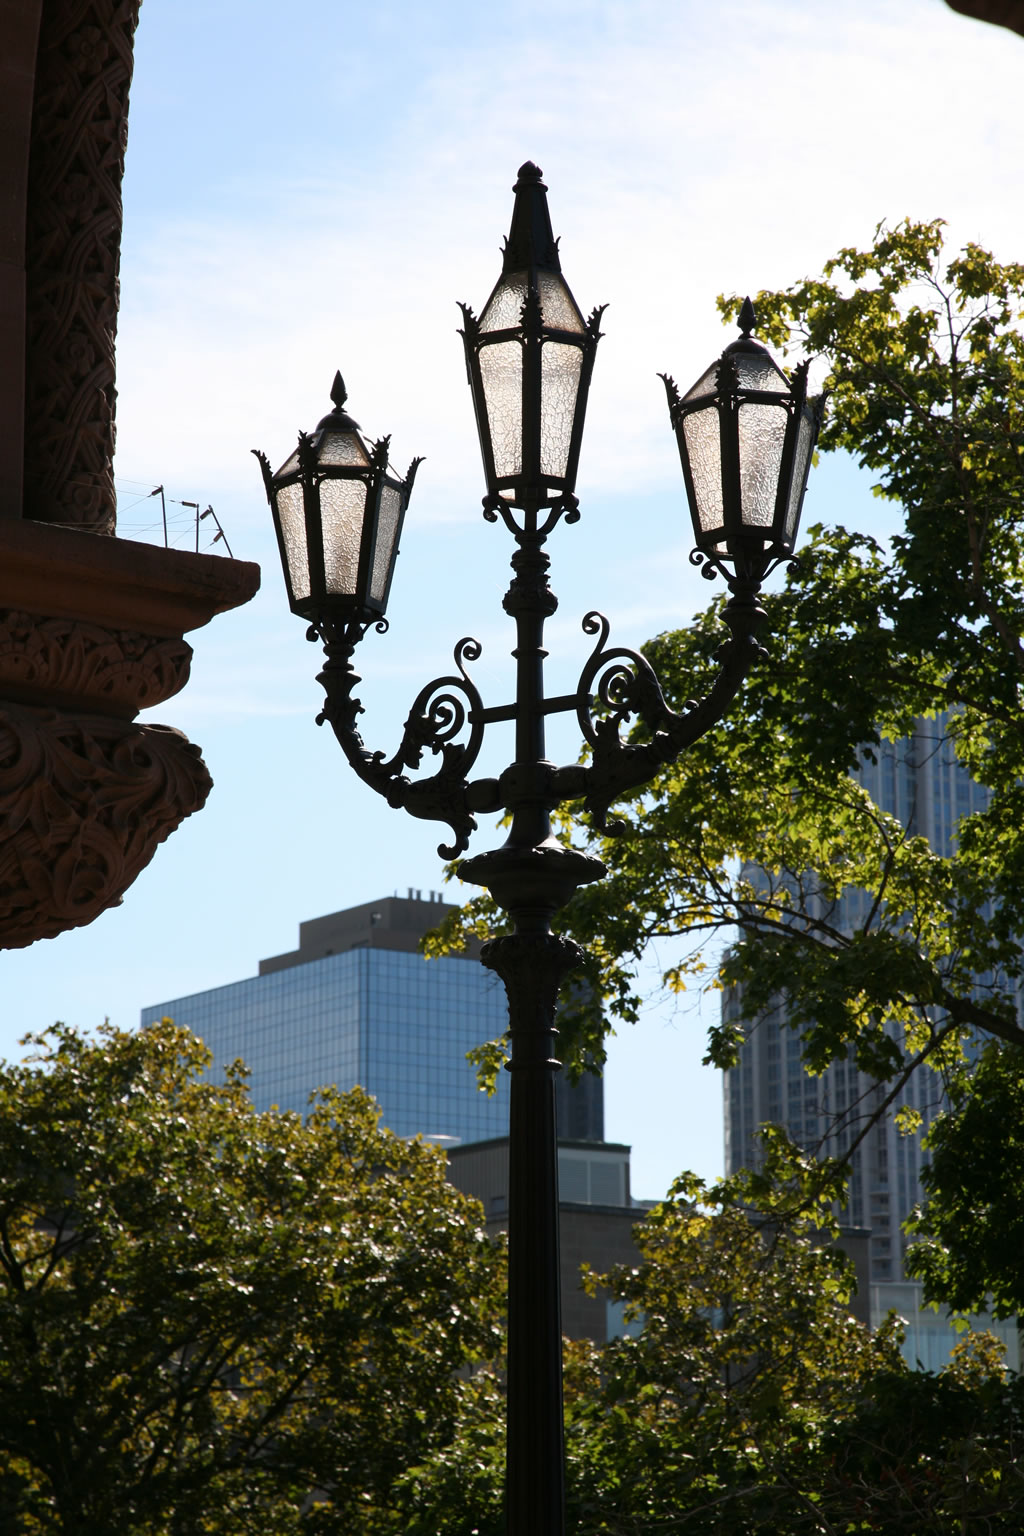 Heritage lamp post near the south entrance of the Legislative Building